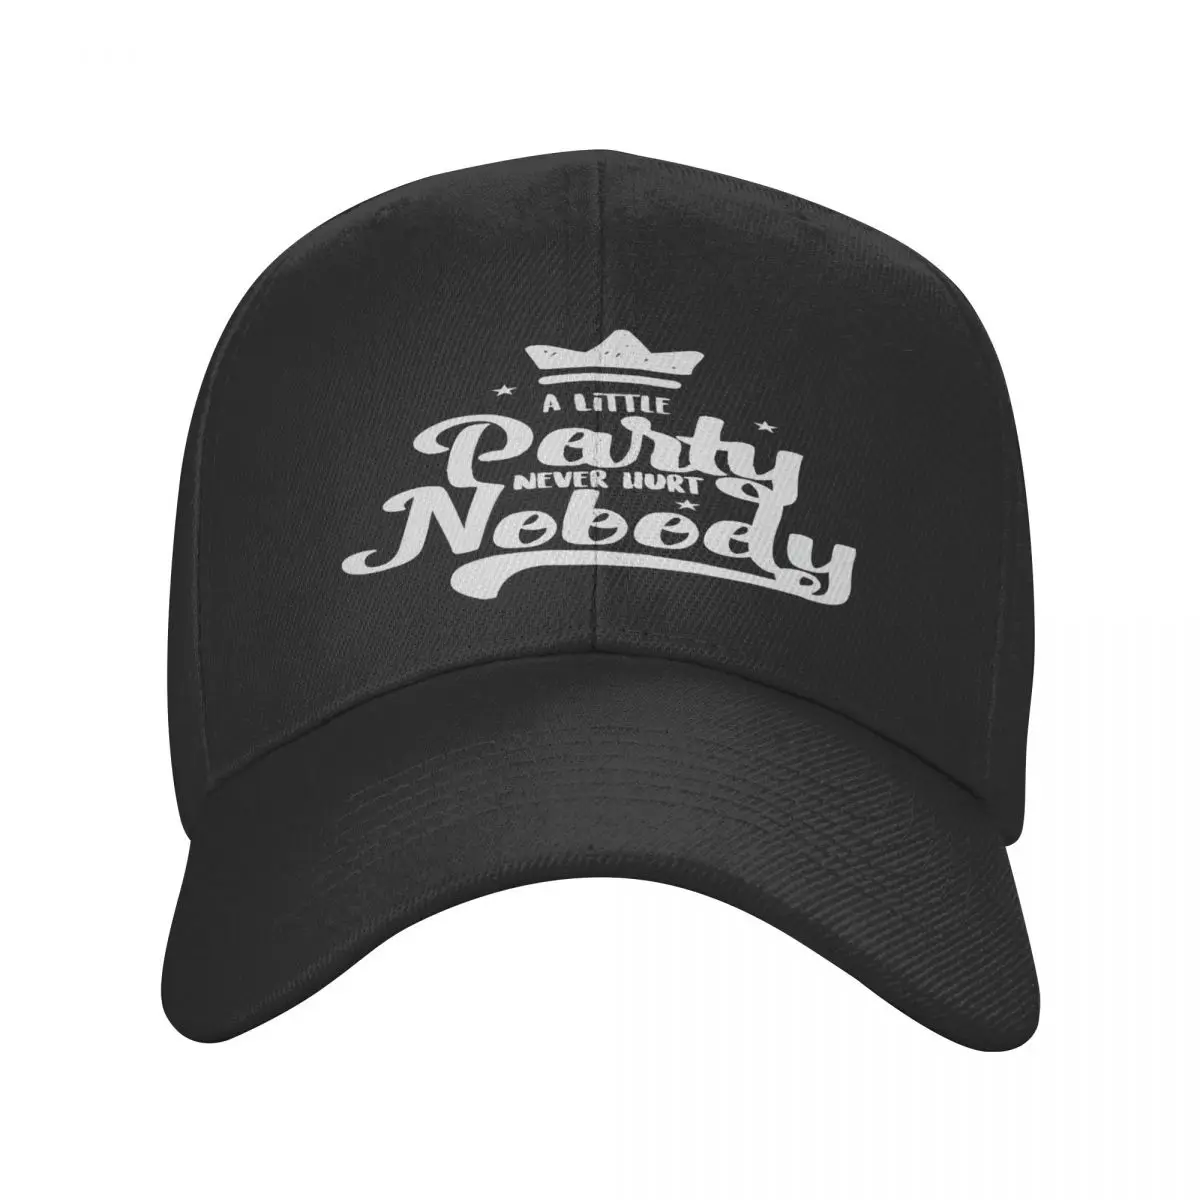 

A Little Party Never Hurt Nobody Casquette, Polyester Cap Personalized Practical Adjustable Cap Nice Gift